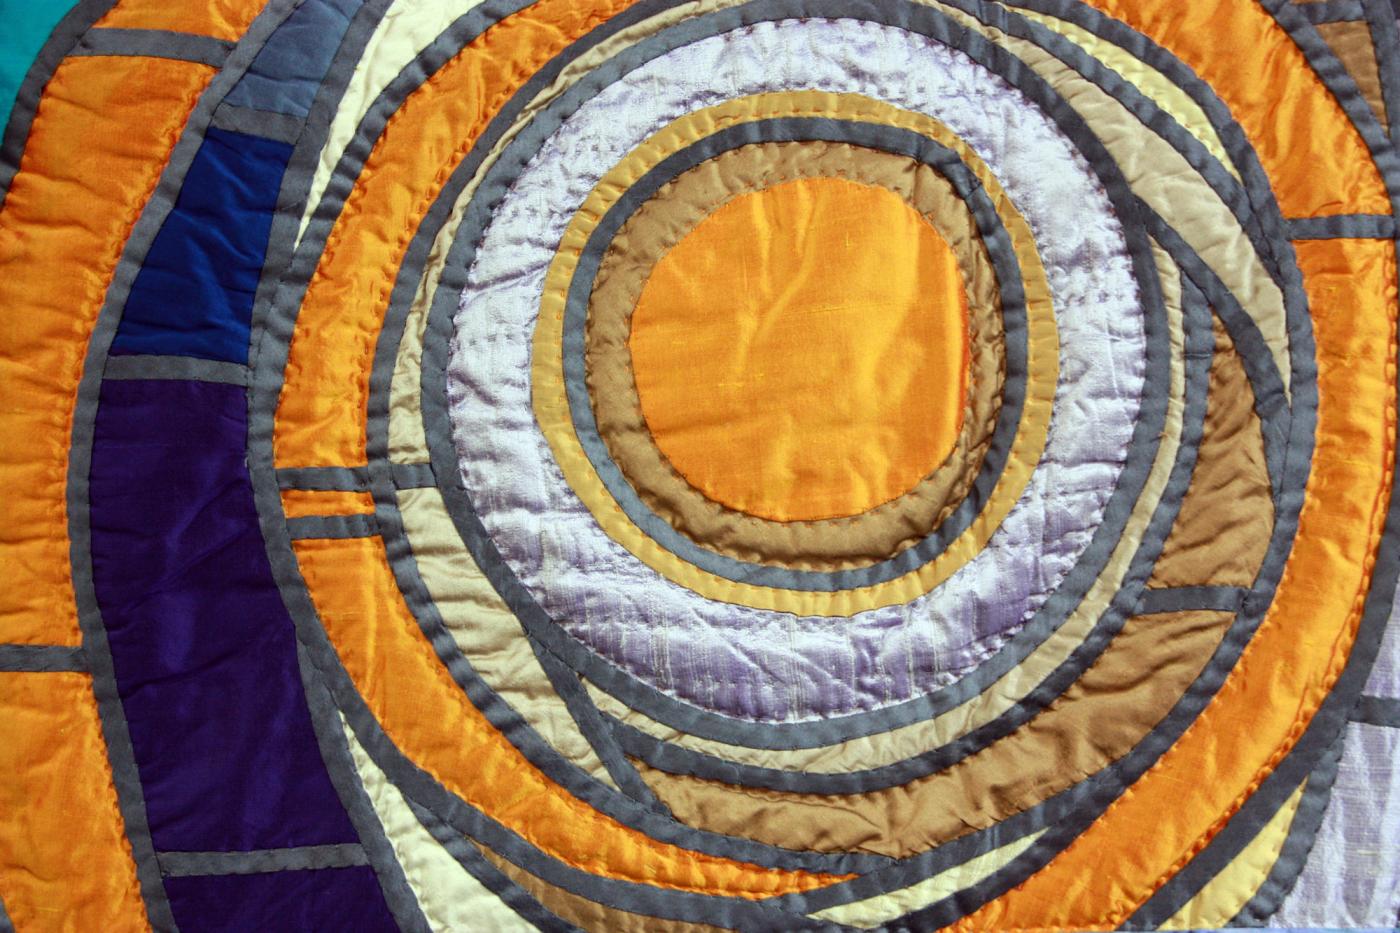 detail of "Journey Towards Peace, a quilt at the chapel of the ecumenical center, Geneva